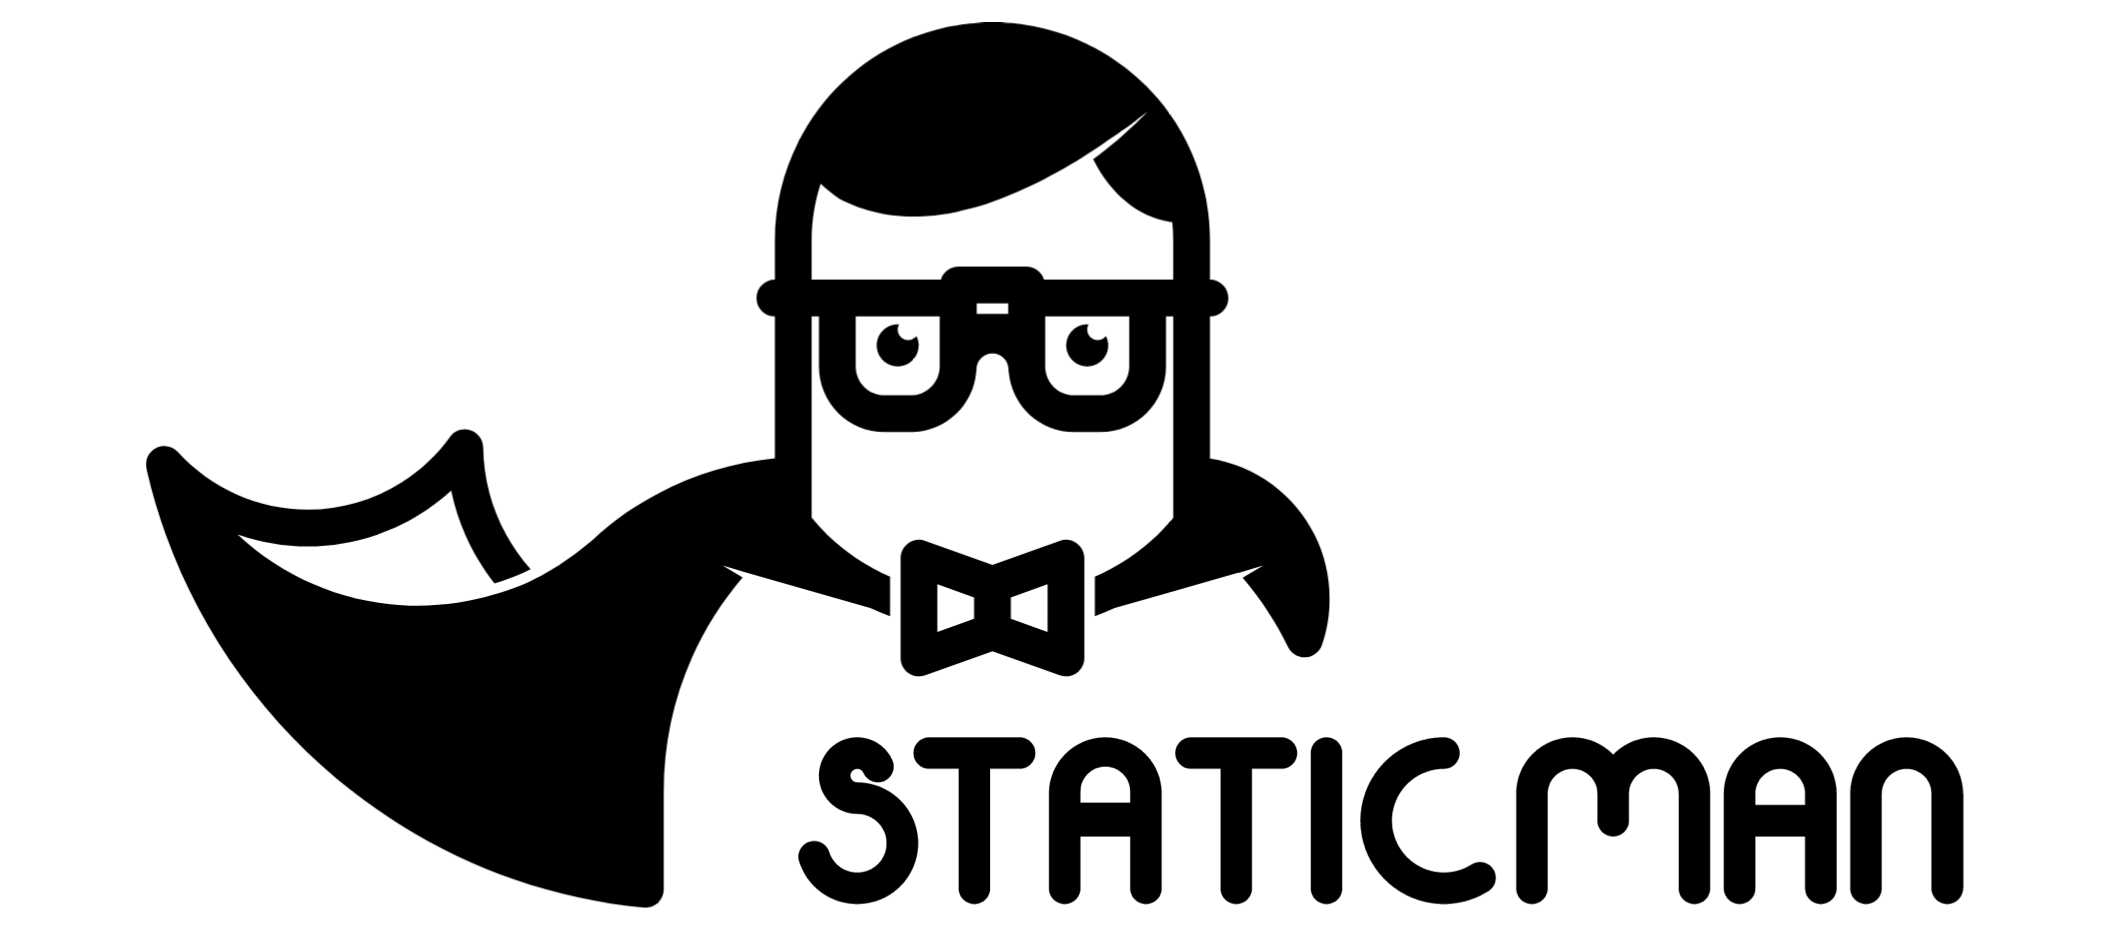 Staticman logo, a man with glasses wearing a cape